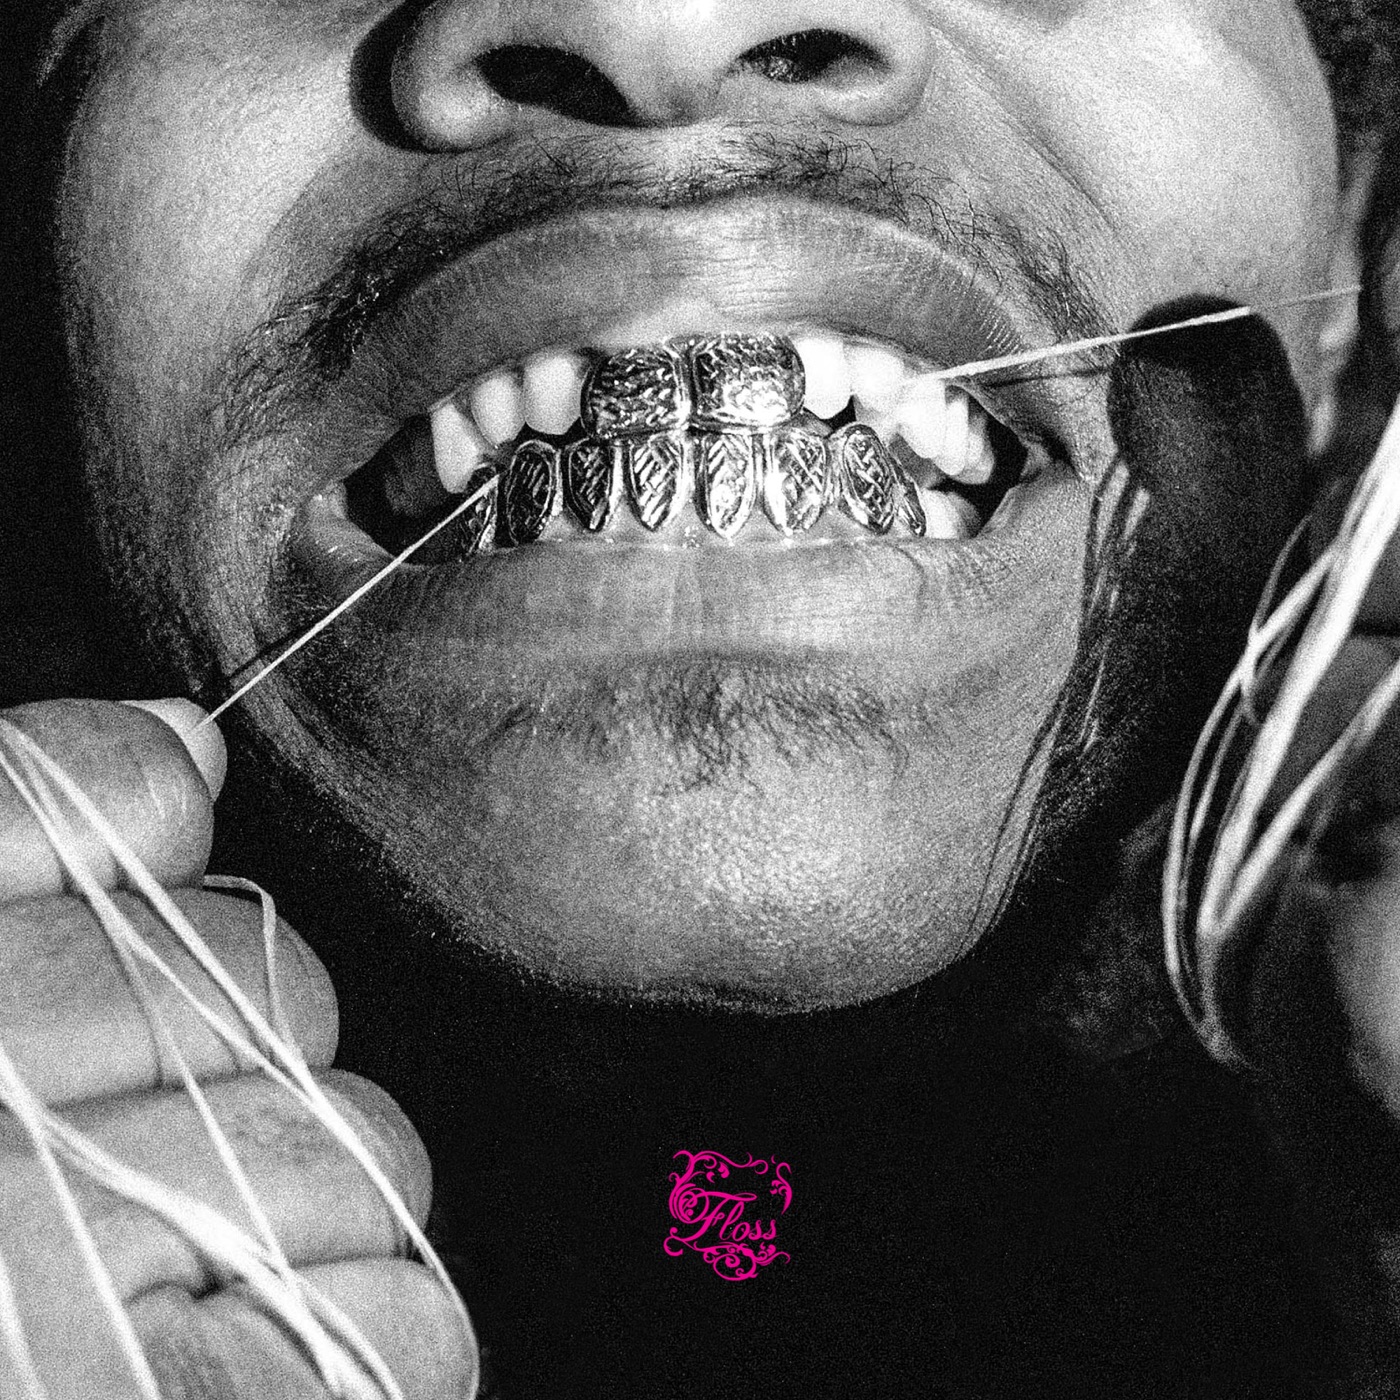 Floss by Injury Reserve